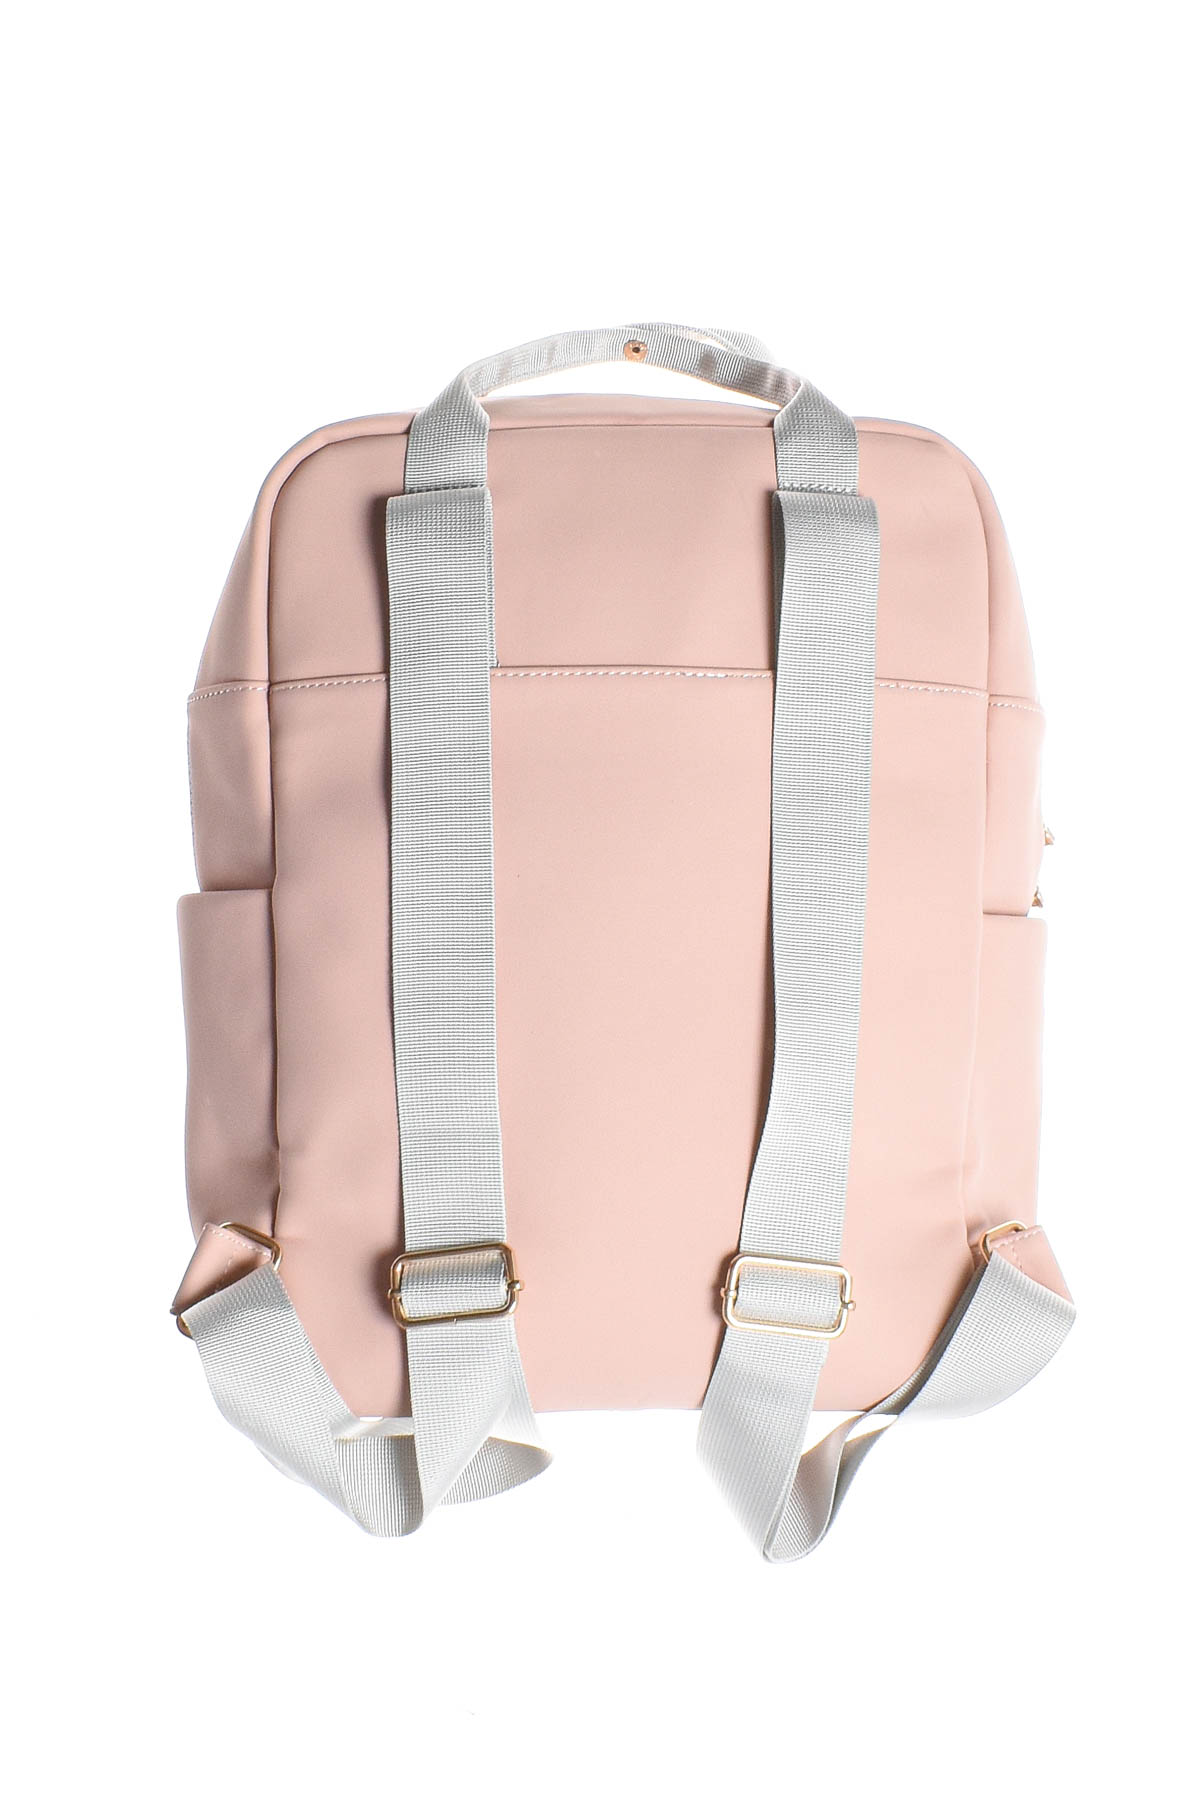 Backpack - New Yorker Accessories - 1